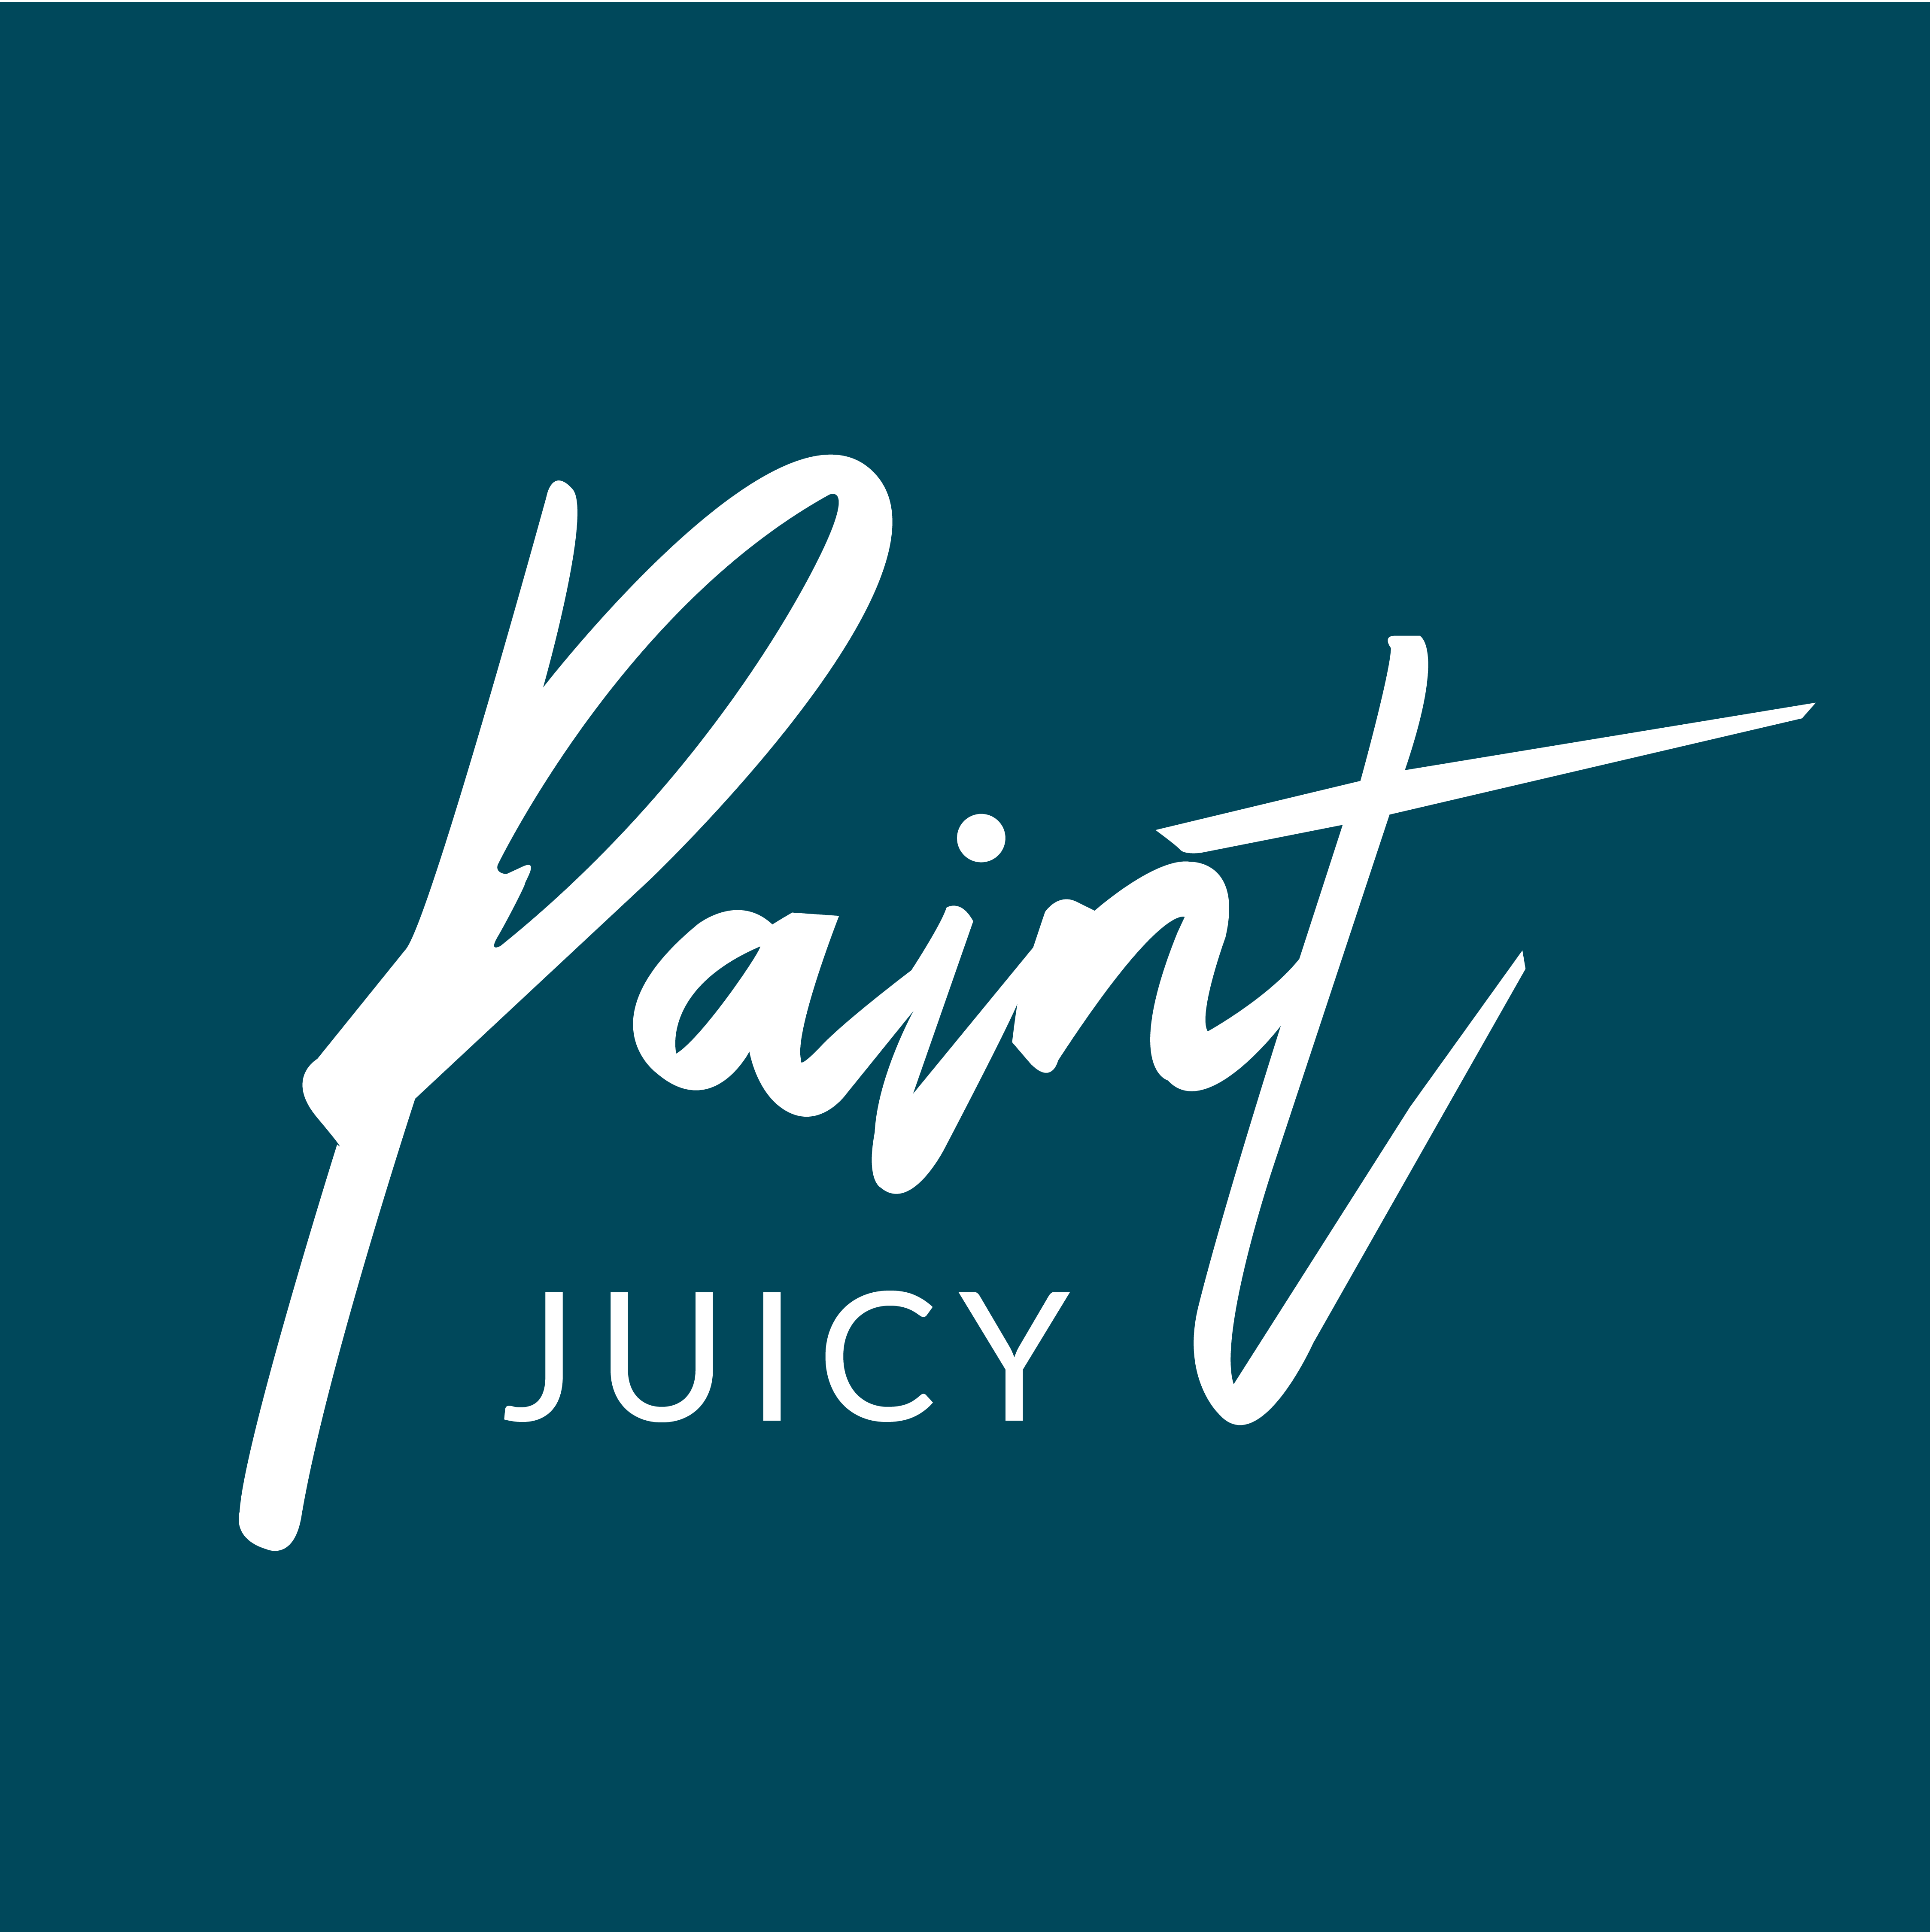 Paint Juicy Paint and Sip